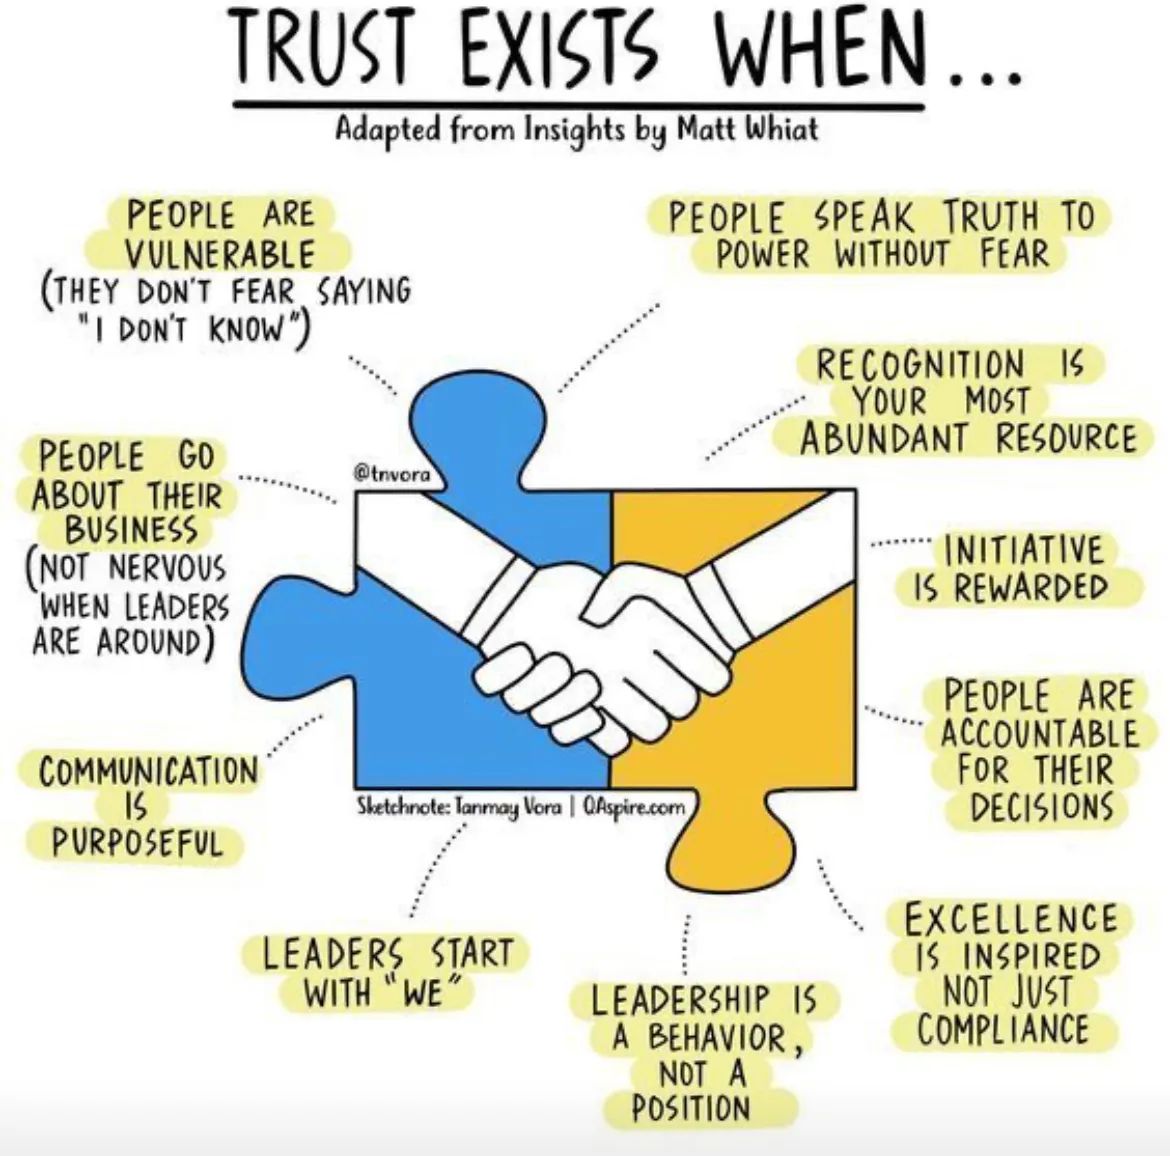 Trust is the lifeblood of ALL relationships. It affords positive conflict, accountability and drives the balance between collective results and happiness. Here’s how to build trust as a leader.